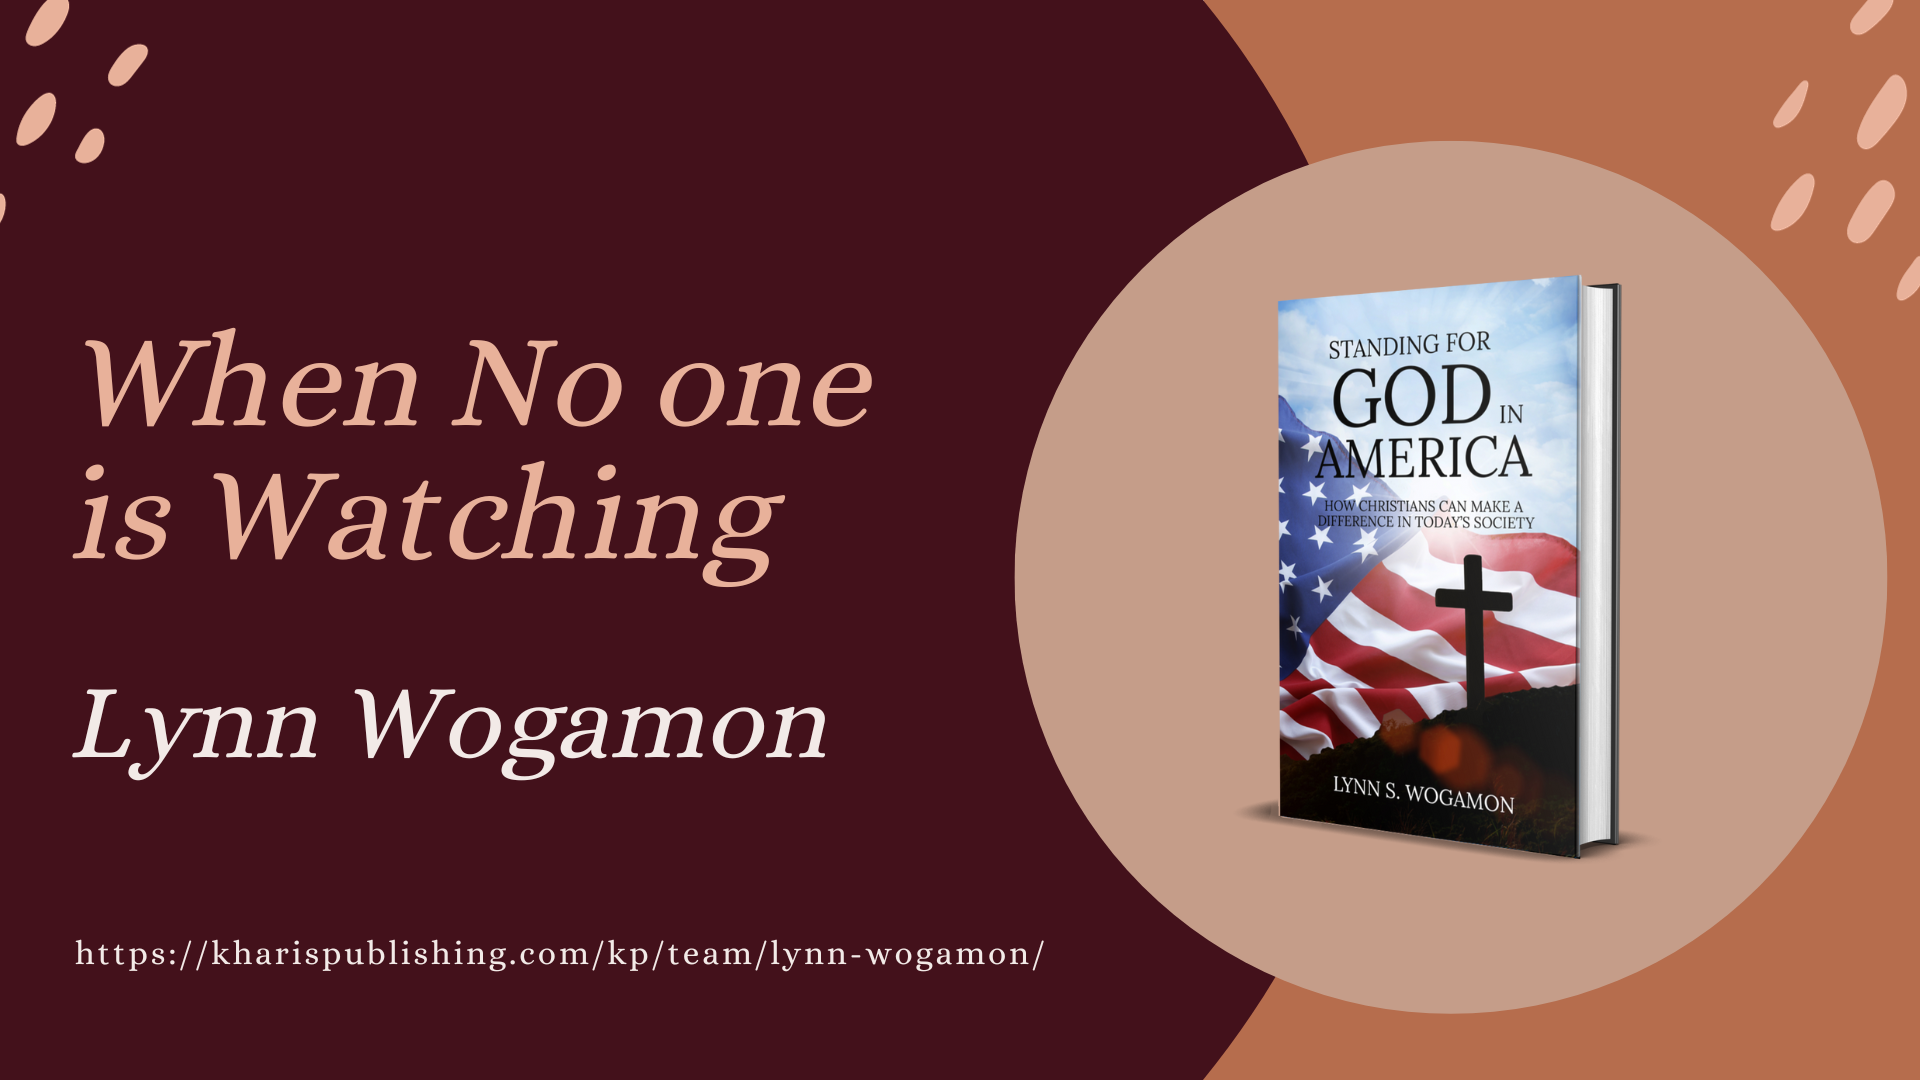 When No One Is Watching Standing for God in America - by Lynn S. Wogamon